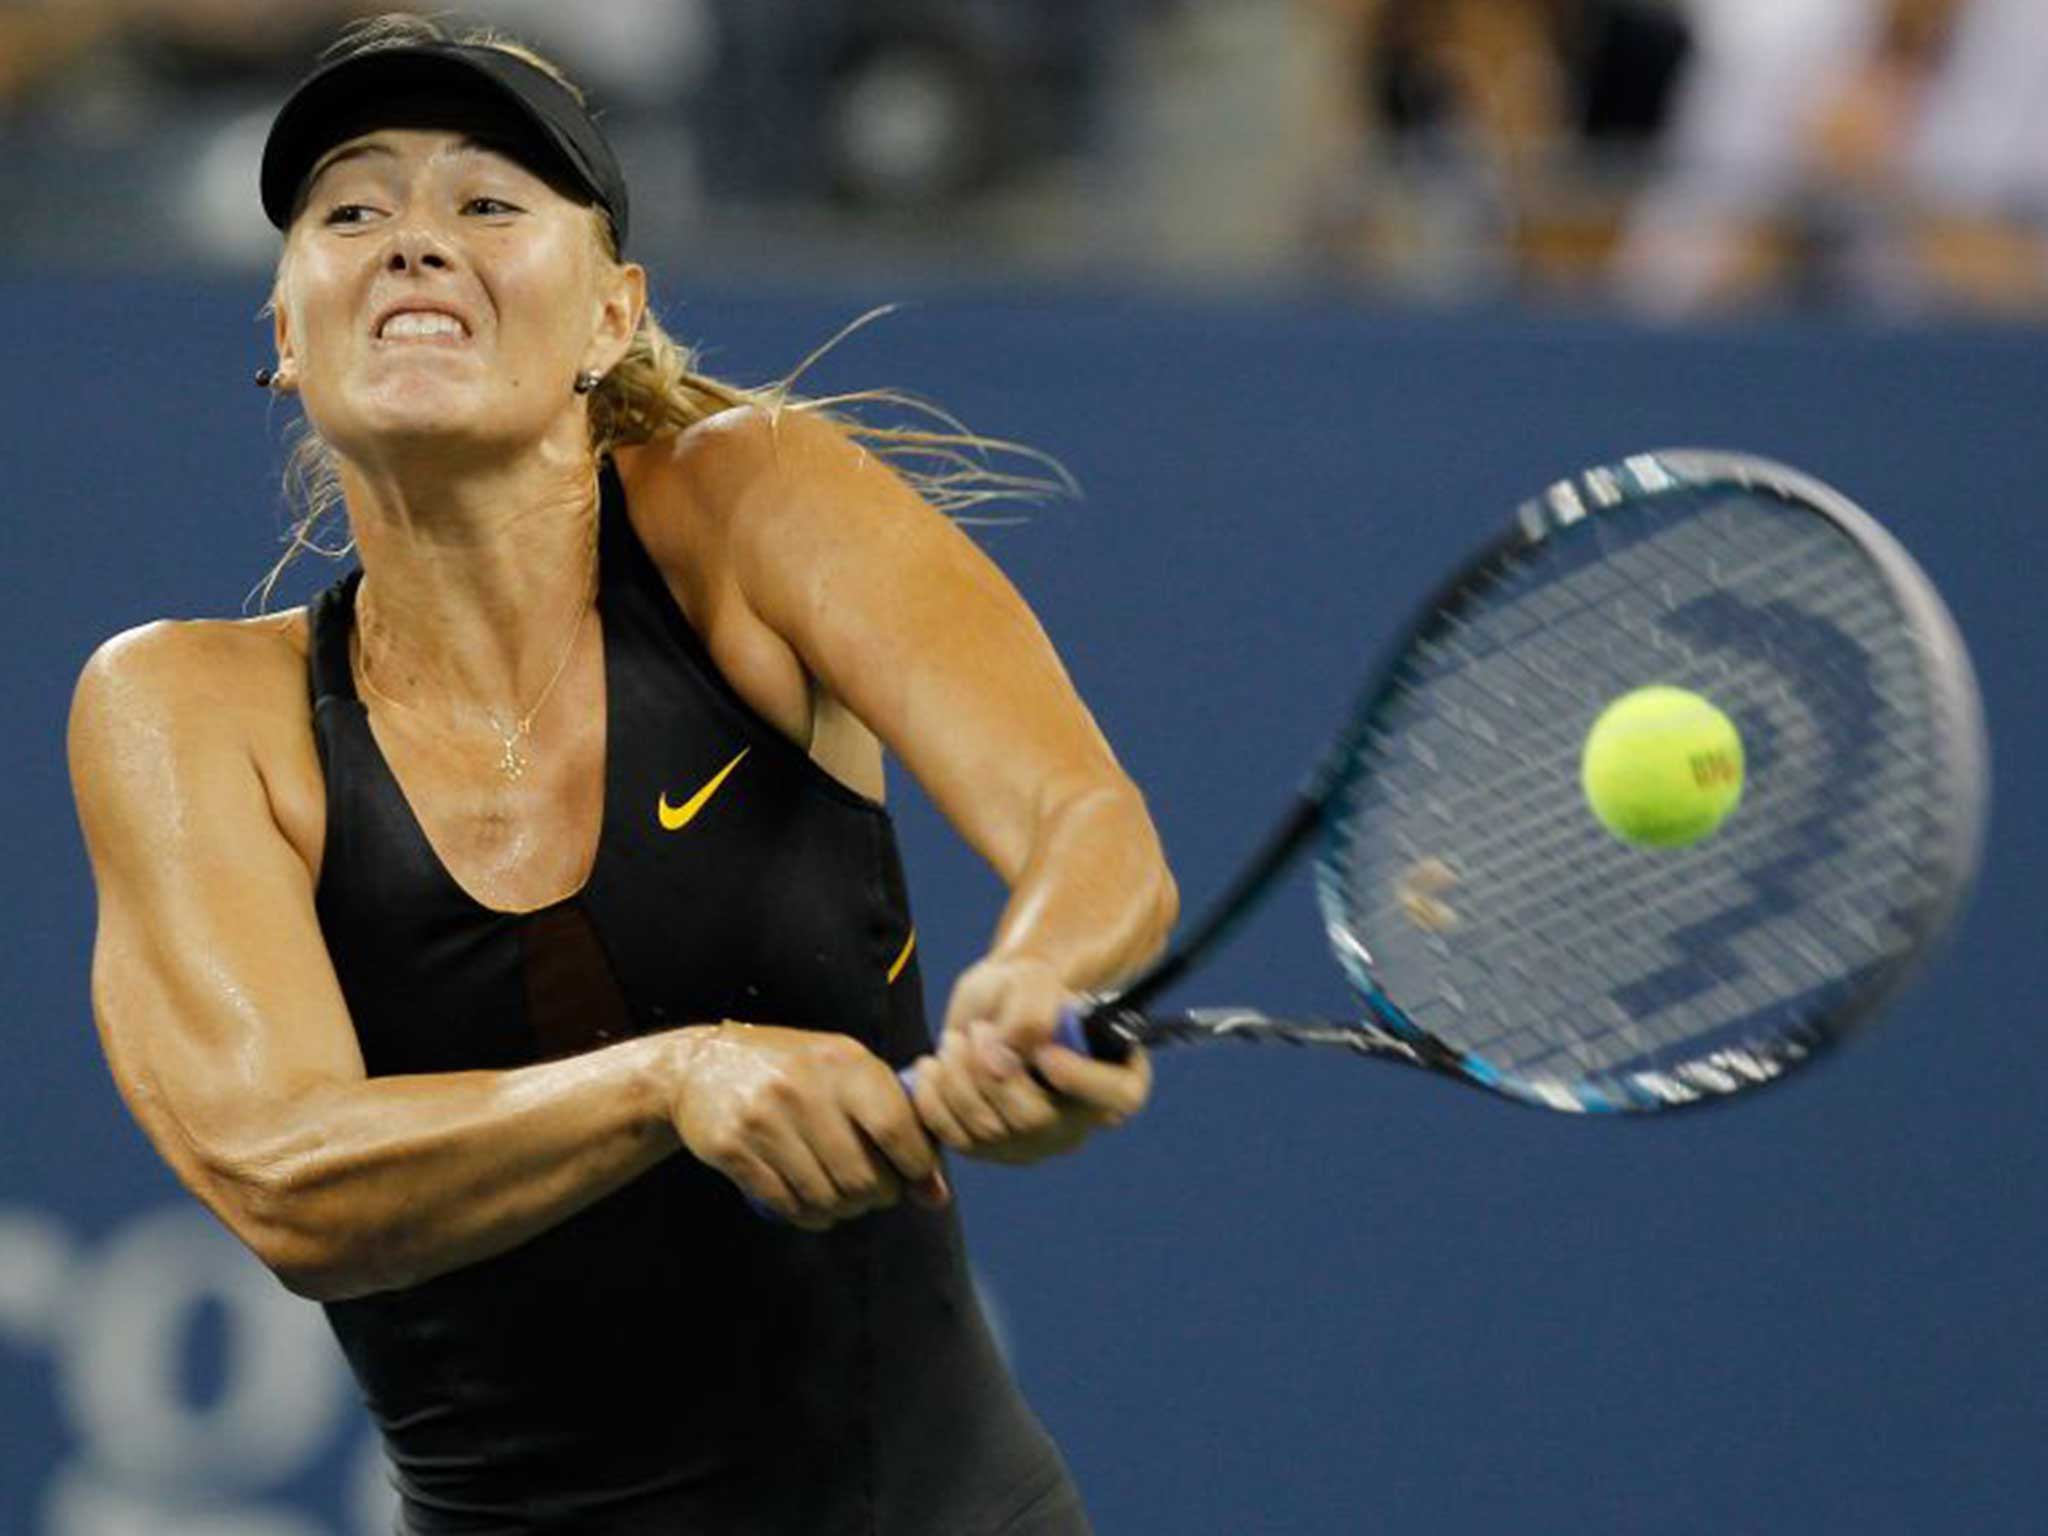 &#13;
Sharapova could see her ban reduced after appealing to the Court of Arbitration for Sport &#13;